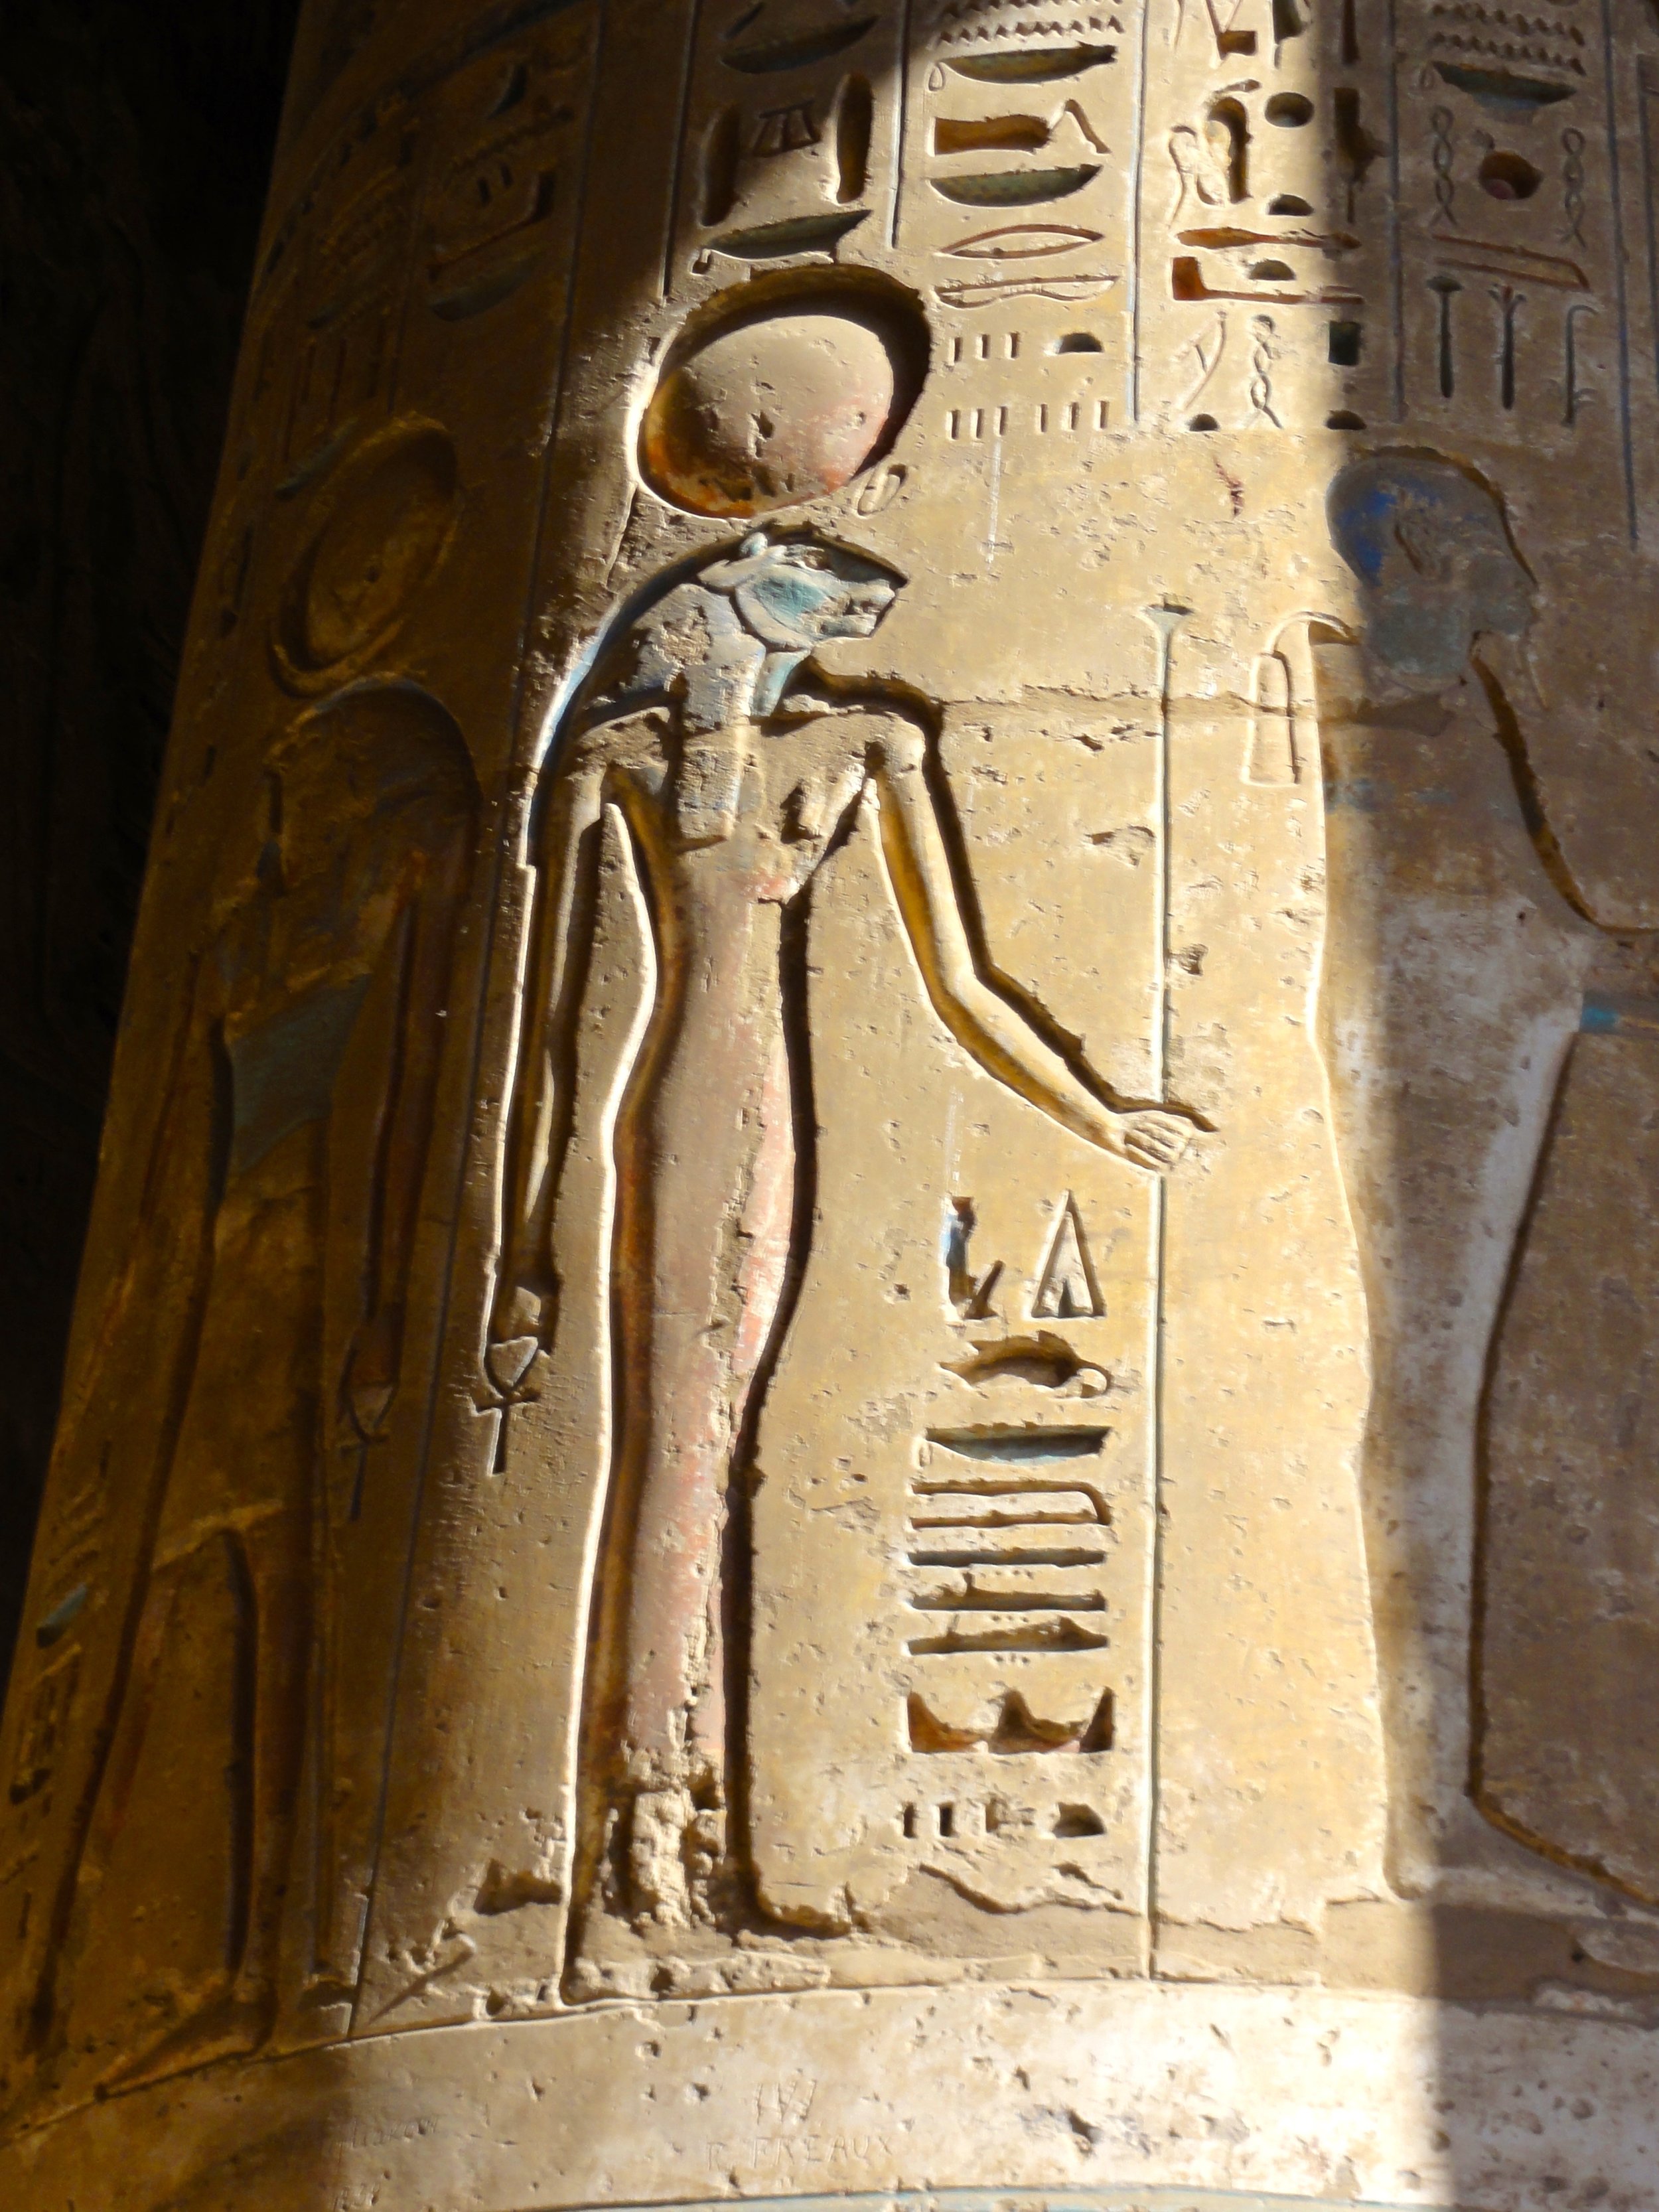 Sekhmet and Ptah reliefs on the columns